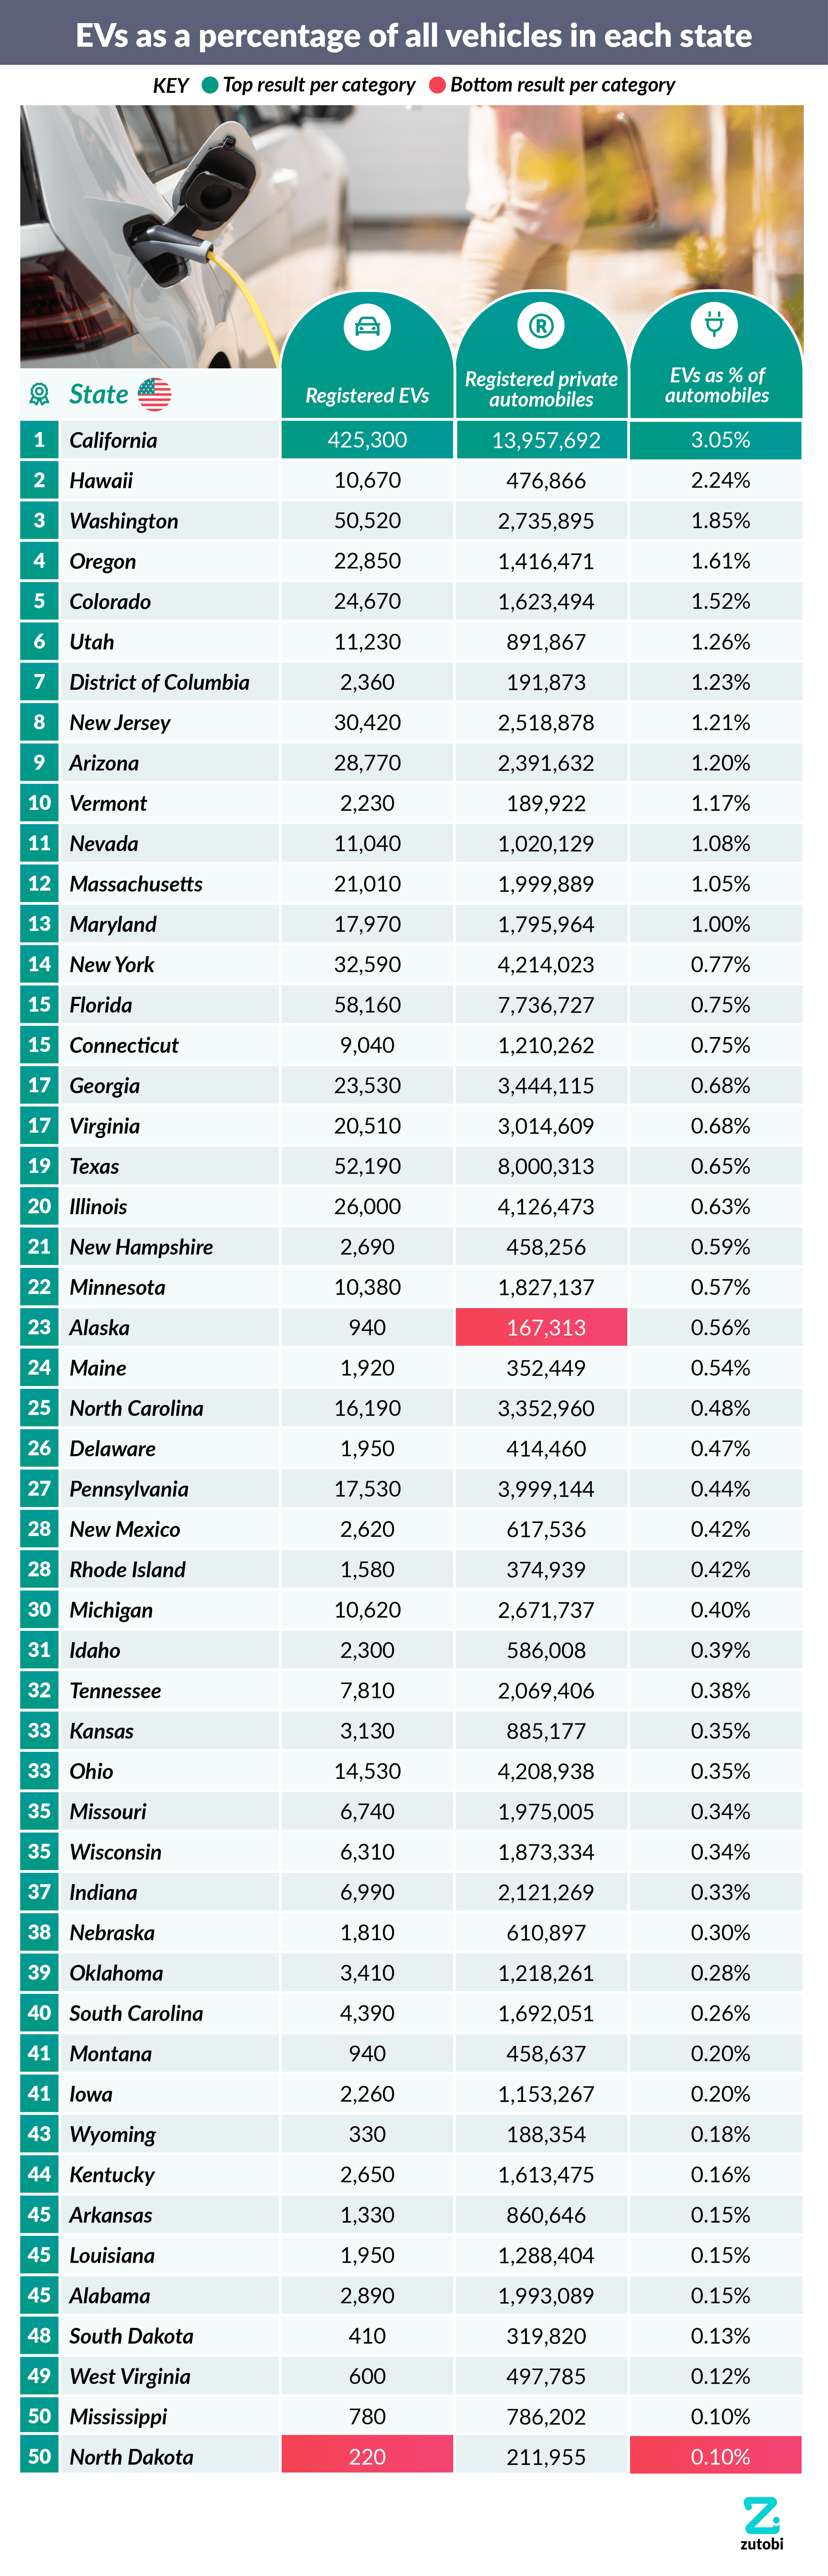 US states with the highest EV adoption